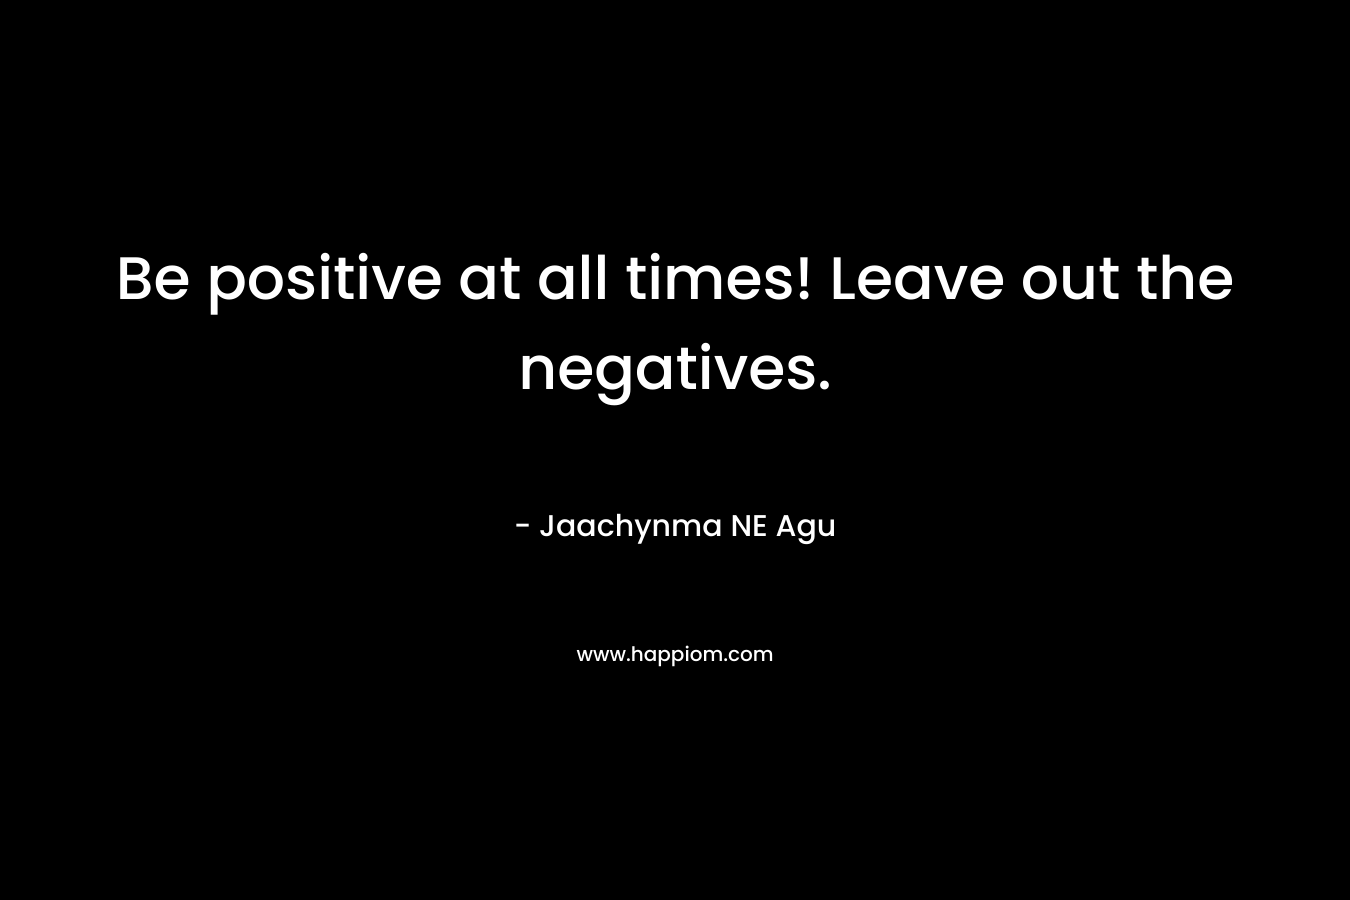 Be positive at all times! Leave out the negatives. – Jaachynma NE Agu